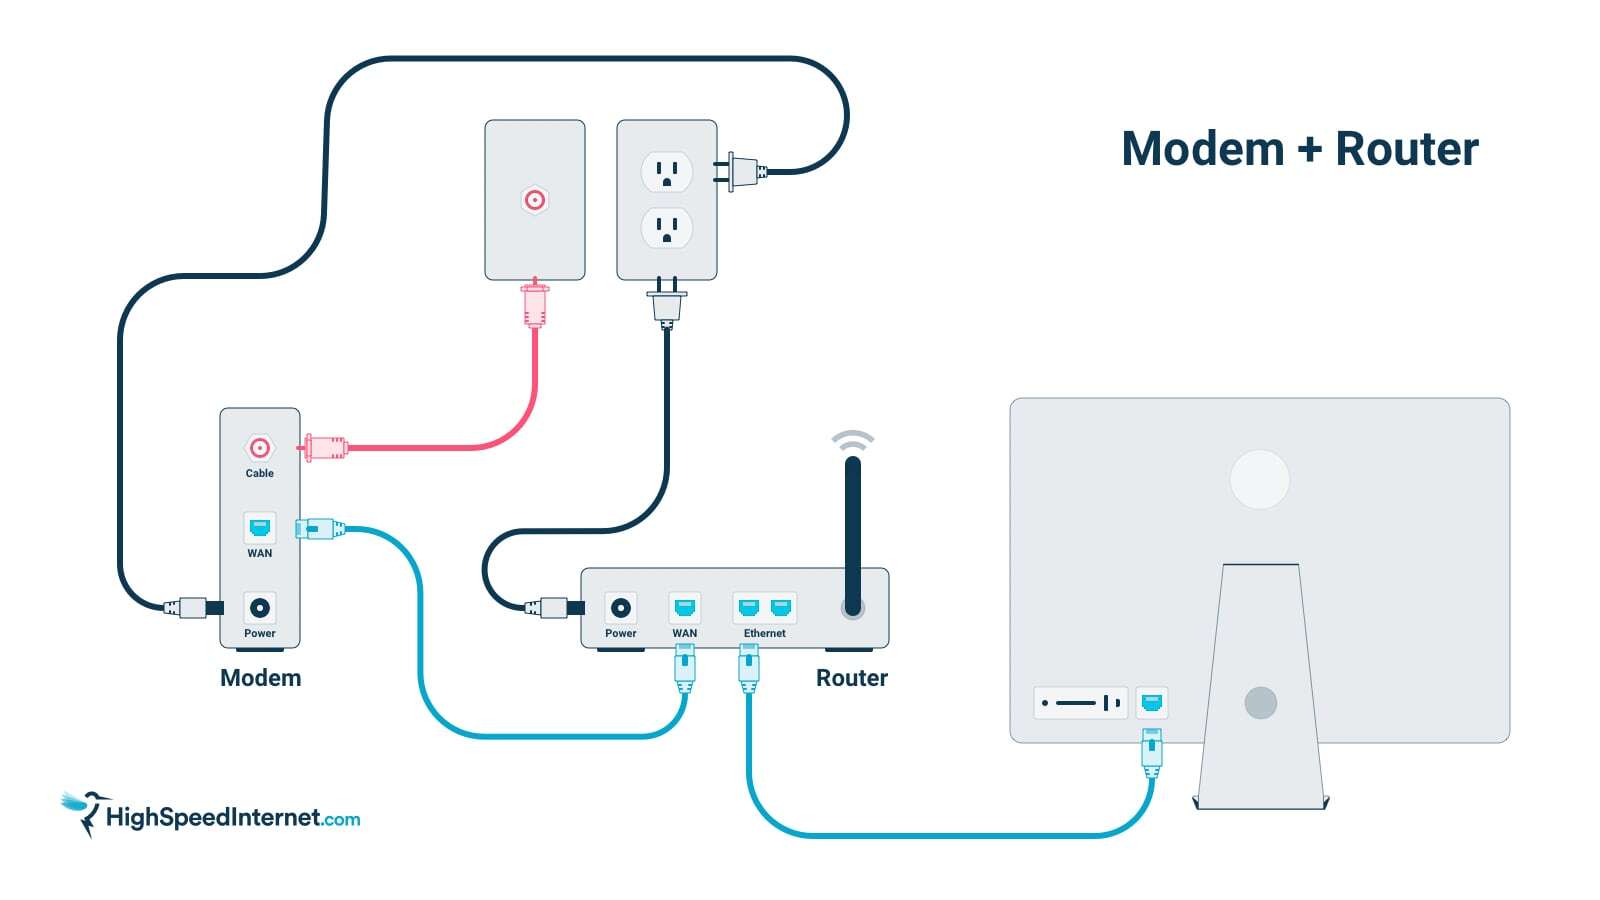 Ensure that all ethernet cables are securely plugged in at both ends.
If using a wireless connection, check that the router is powered on and the Wi-Fi signal is strong.